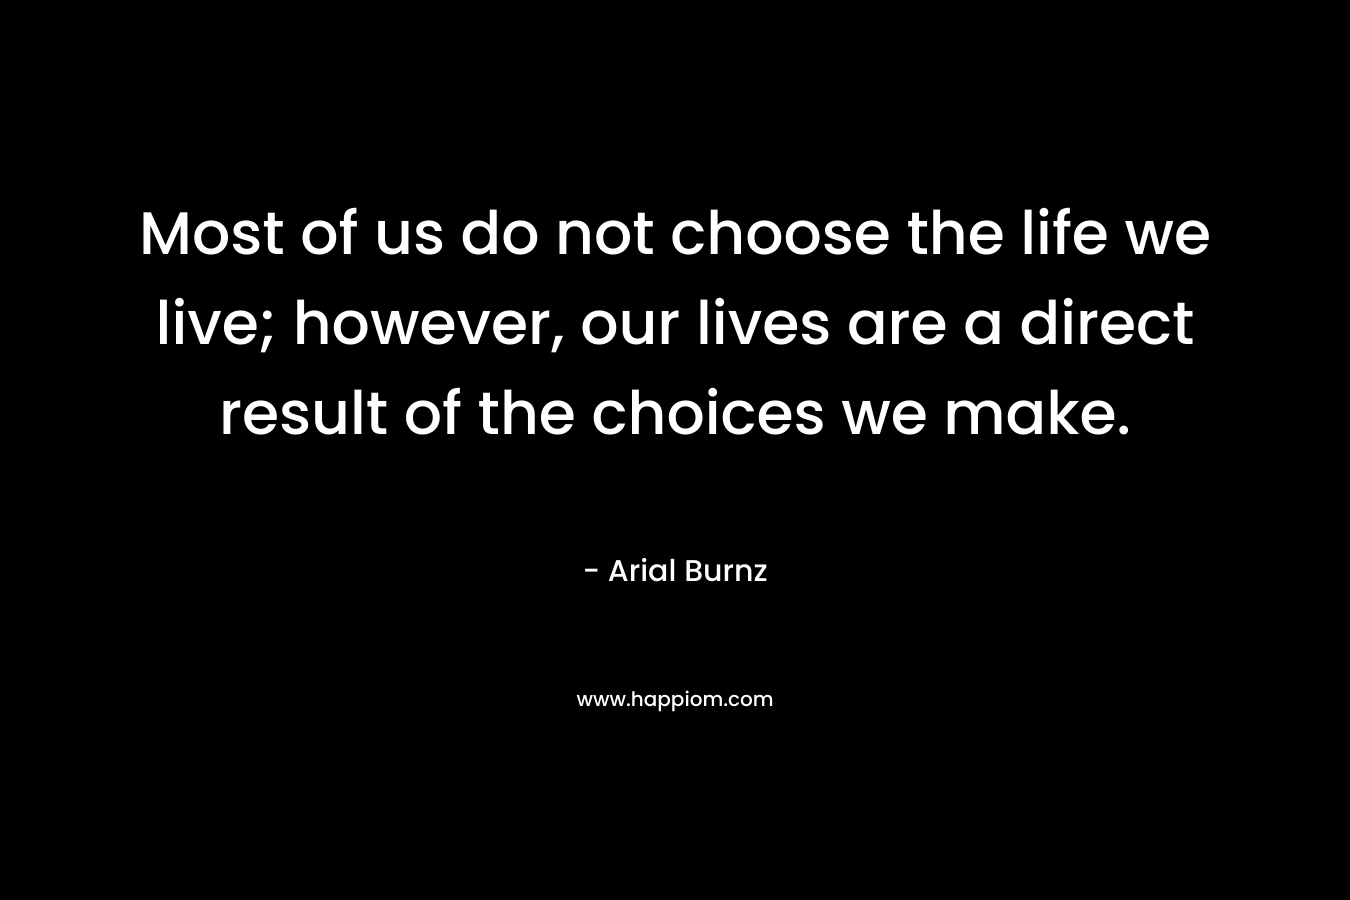 Most of us do not choose the life we live; however, our lives are a direct result of the choices we make. – Arial Burnz